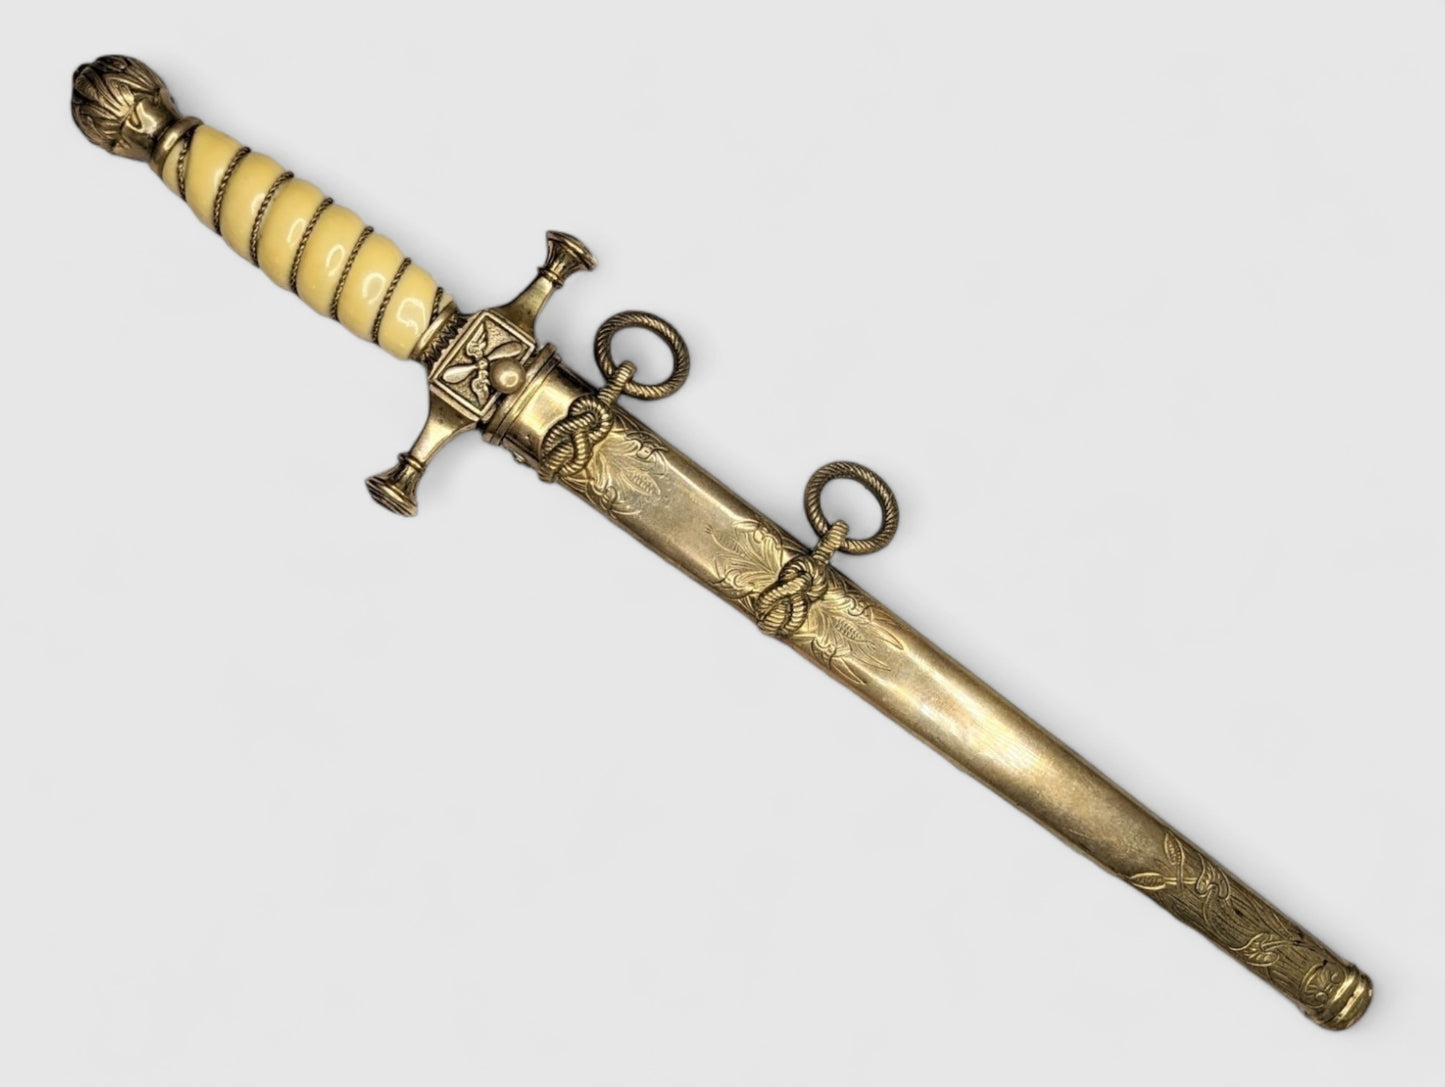 Kingdom of Romania, Royal Air Force Officer's Dagger, Ferdinand I - One of a Kind.